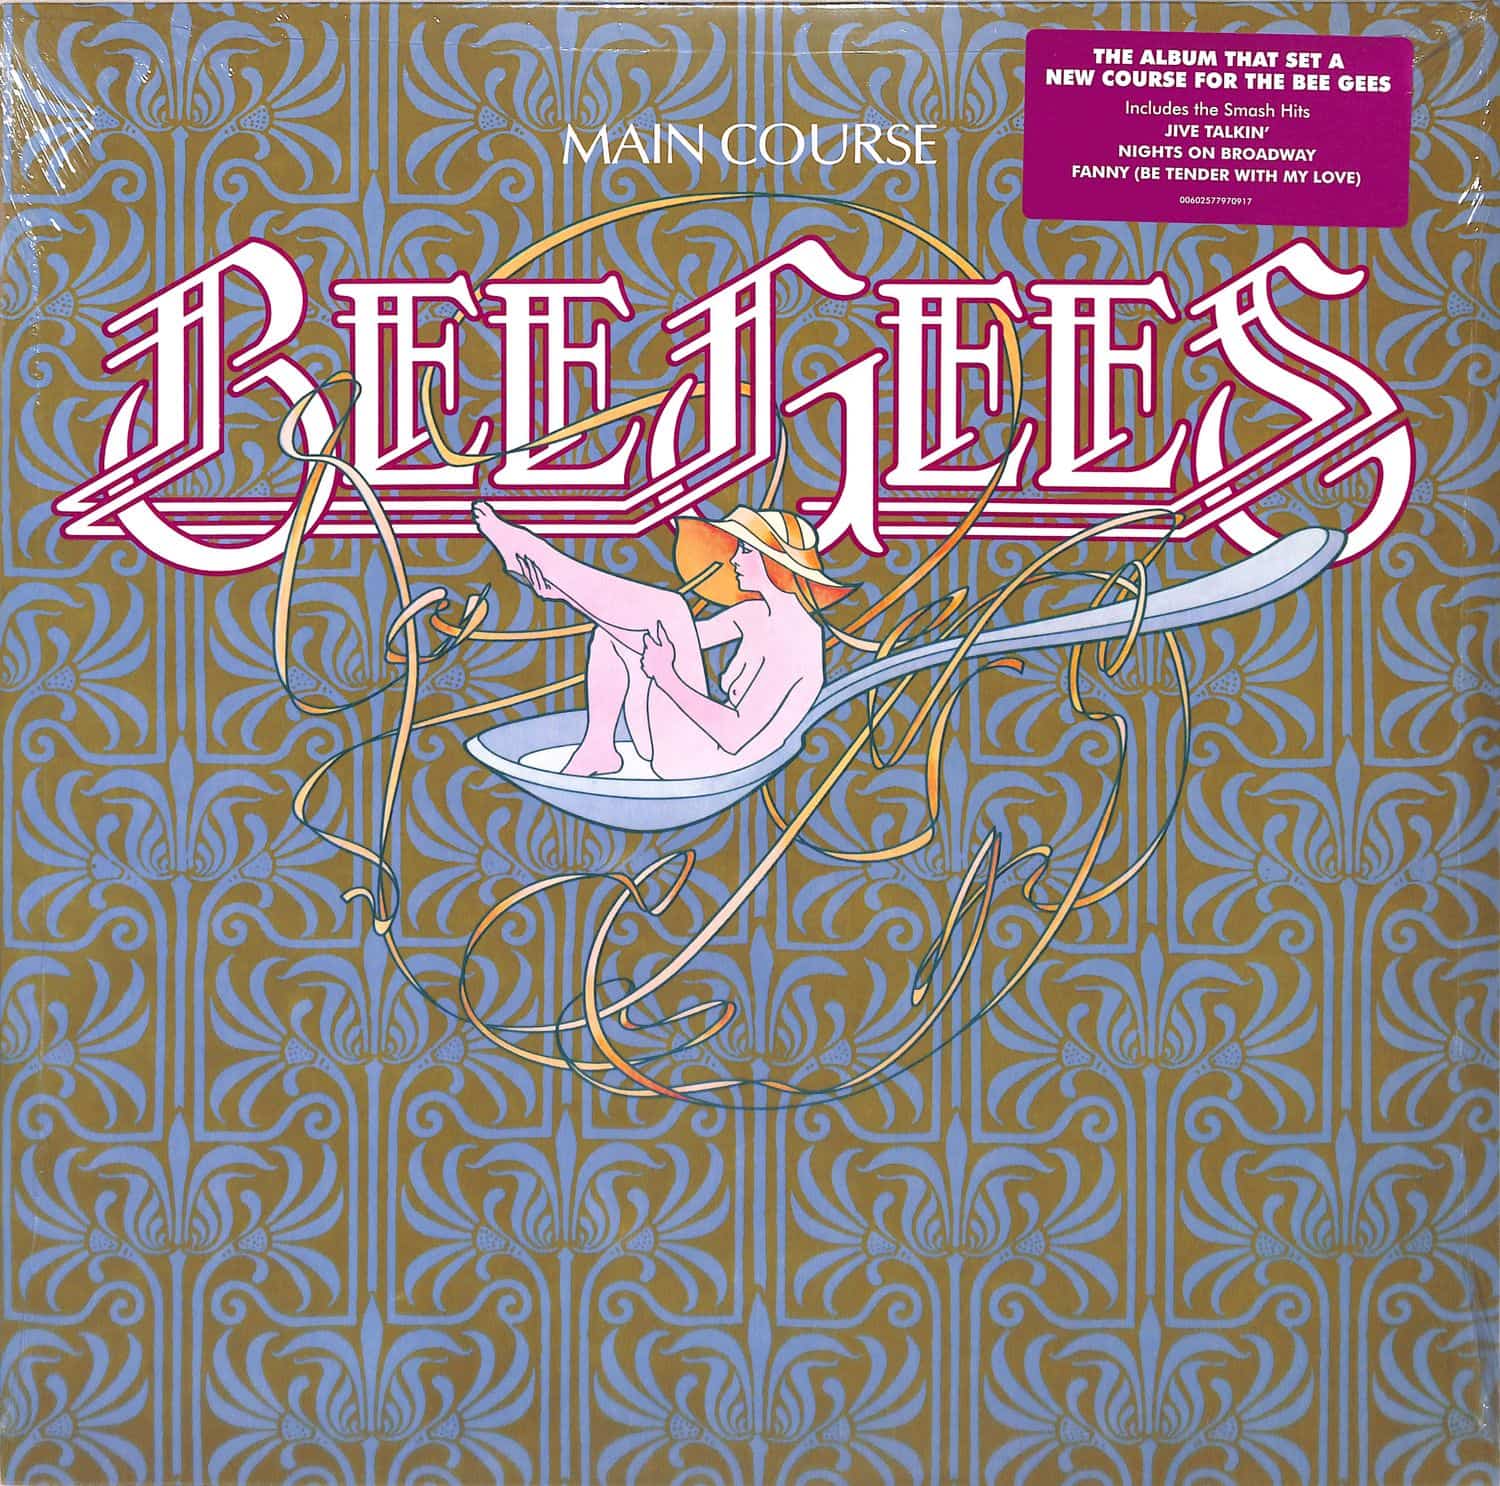 Bee Gees - MAIN COURSE 